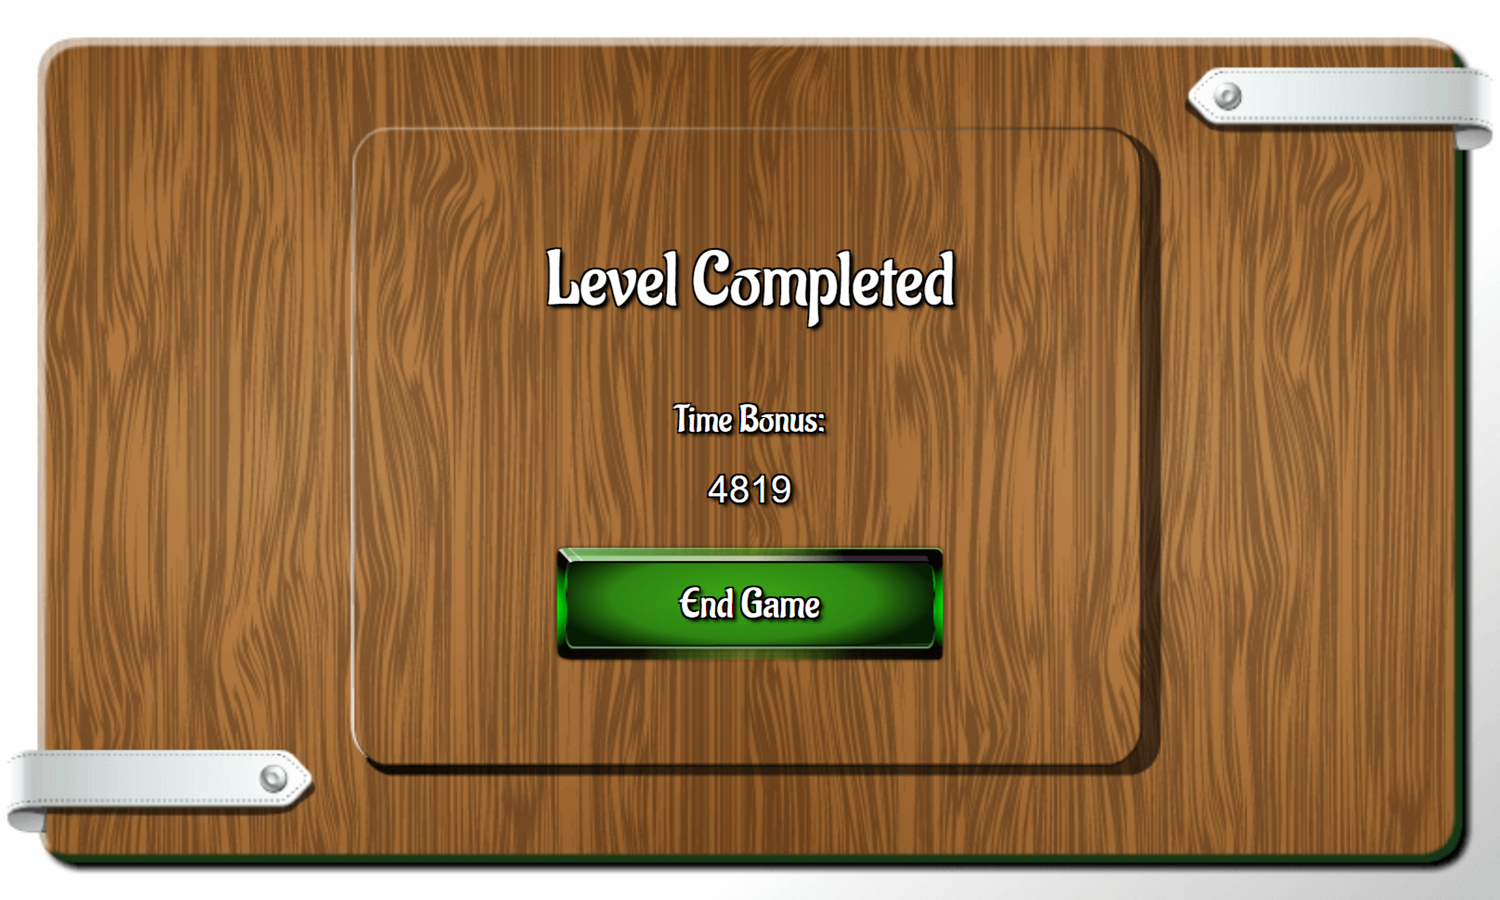 Freecell Duplex Game Level Completed Screenshot.